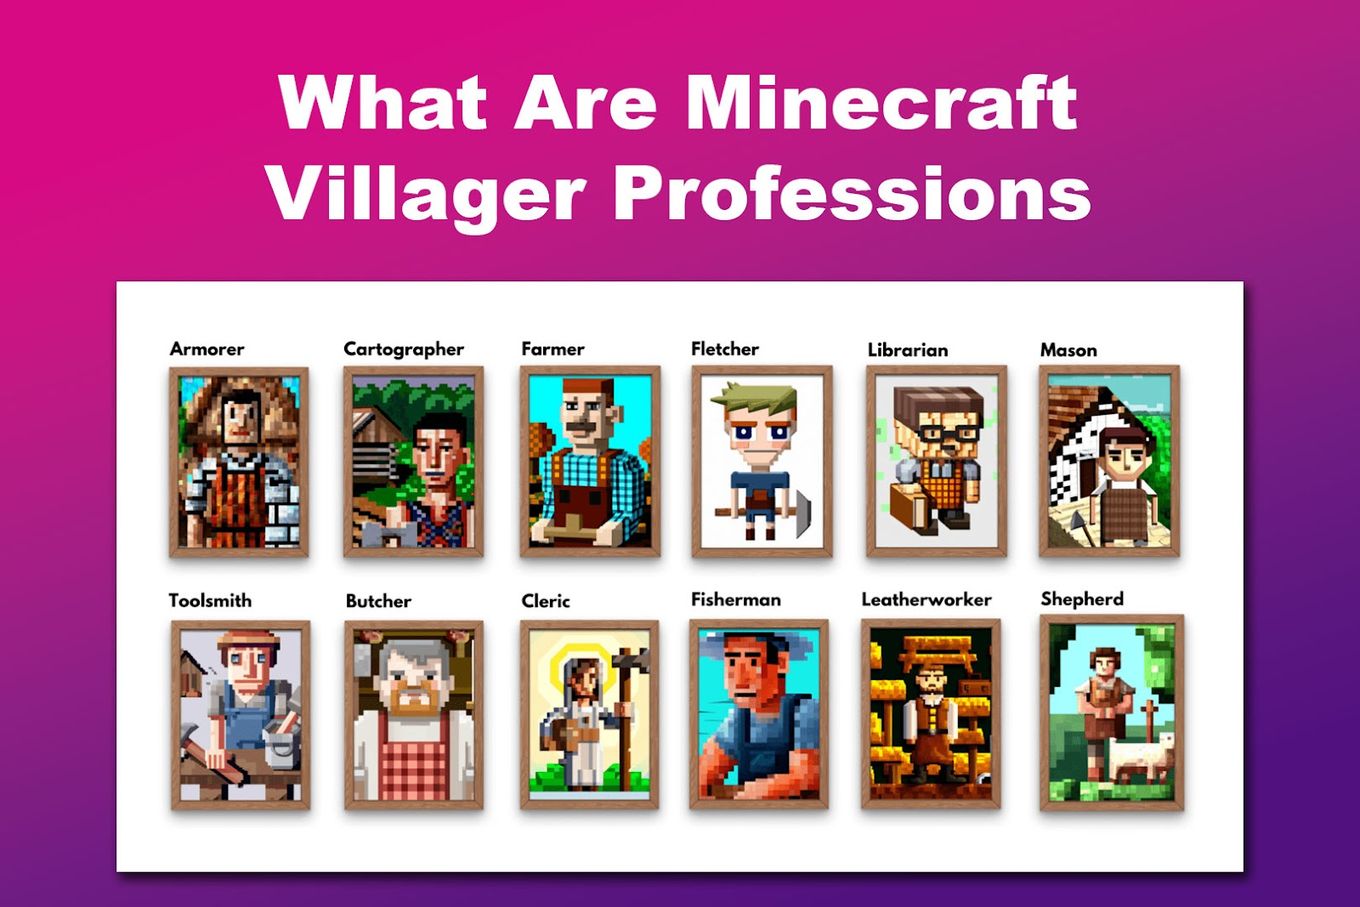 What Are Minecraft Villager Professions